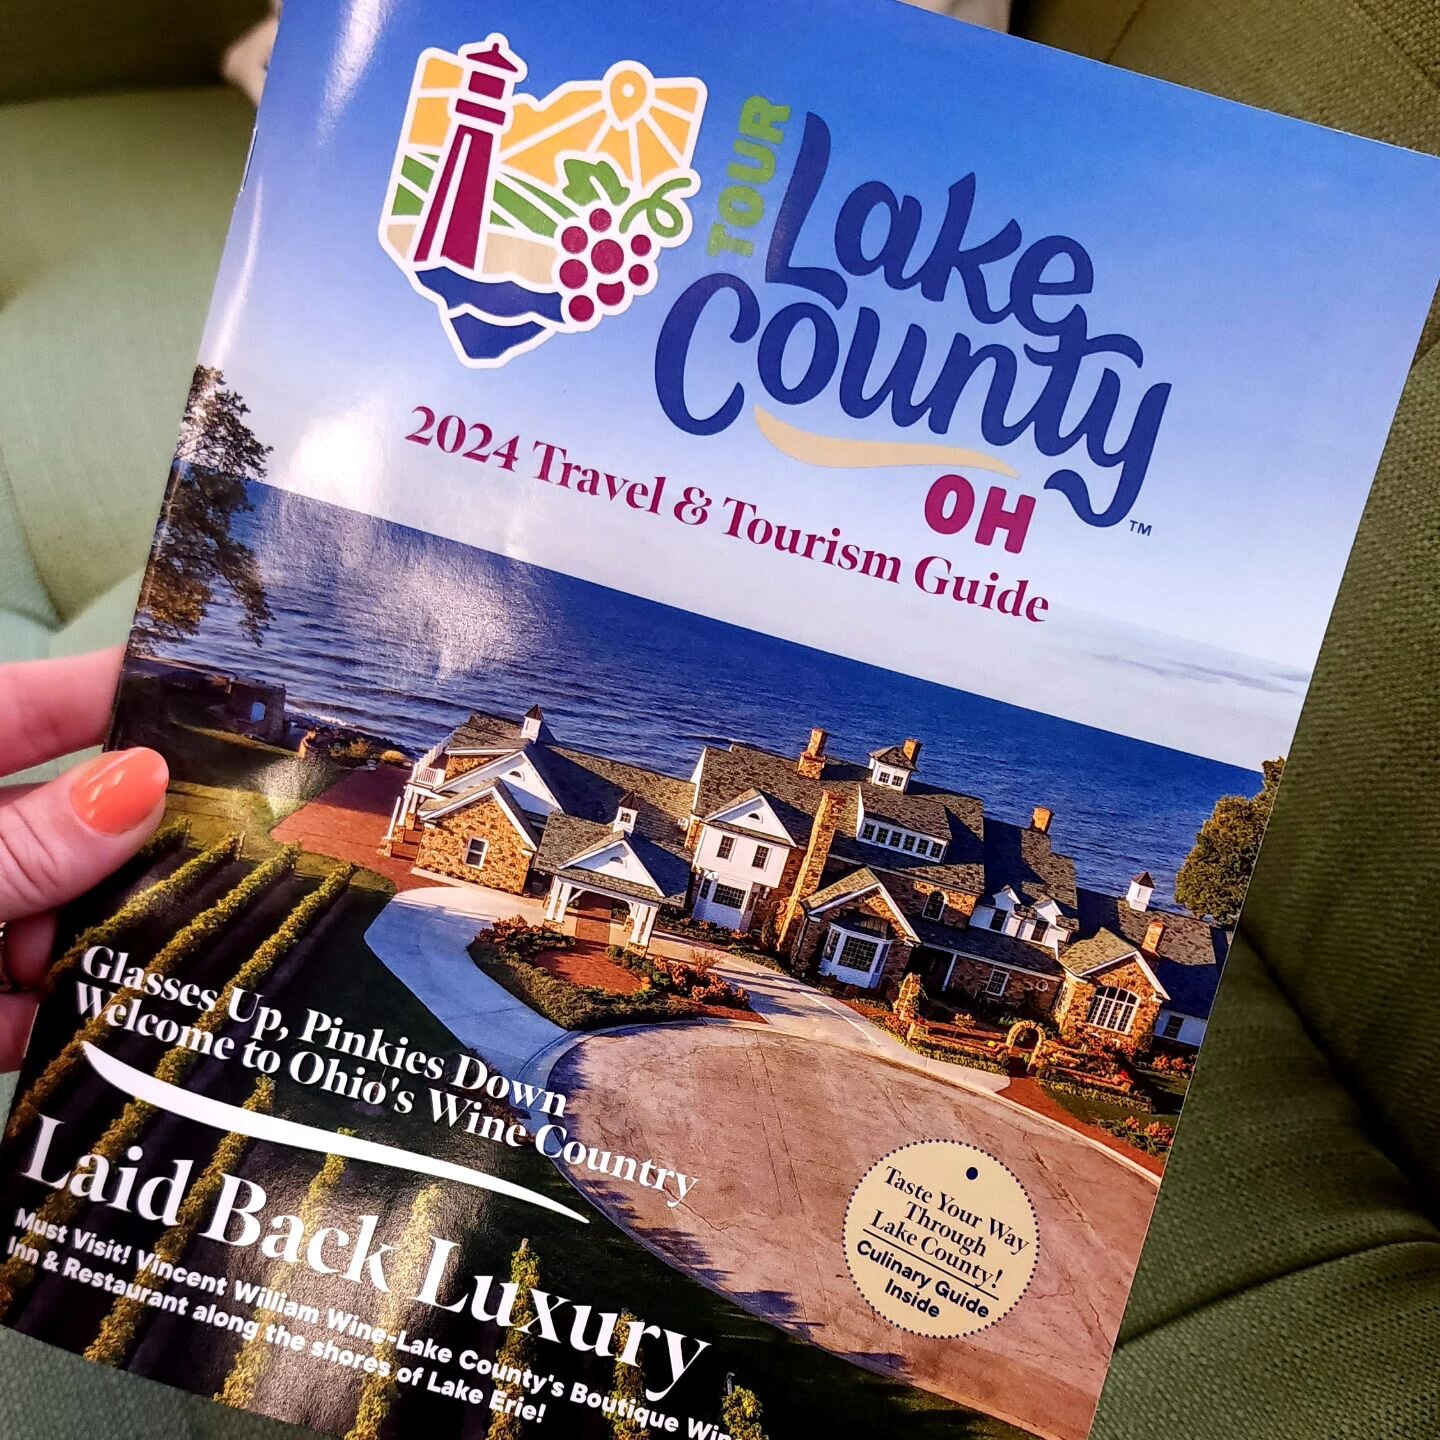 ⚡️The 2024 Travel &amp; Tourism Guide is Now Available⚡️
🔗 Request your FREE copy with the link in bio

🍇 30+ wineries to explore
🥾 Outdoor spots you can't miss
🍷Top spots for dining
🧀 Culinary guide to Lake County, OH
🌊 Adventures on Lake Erie